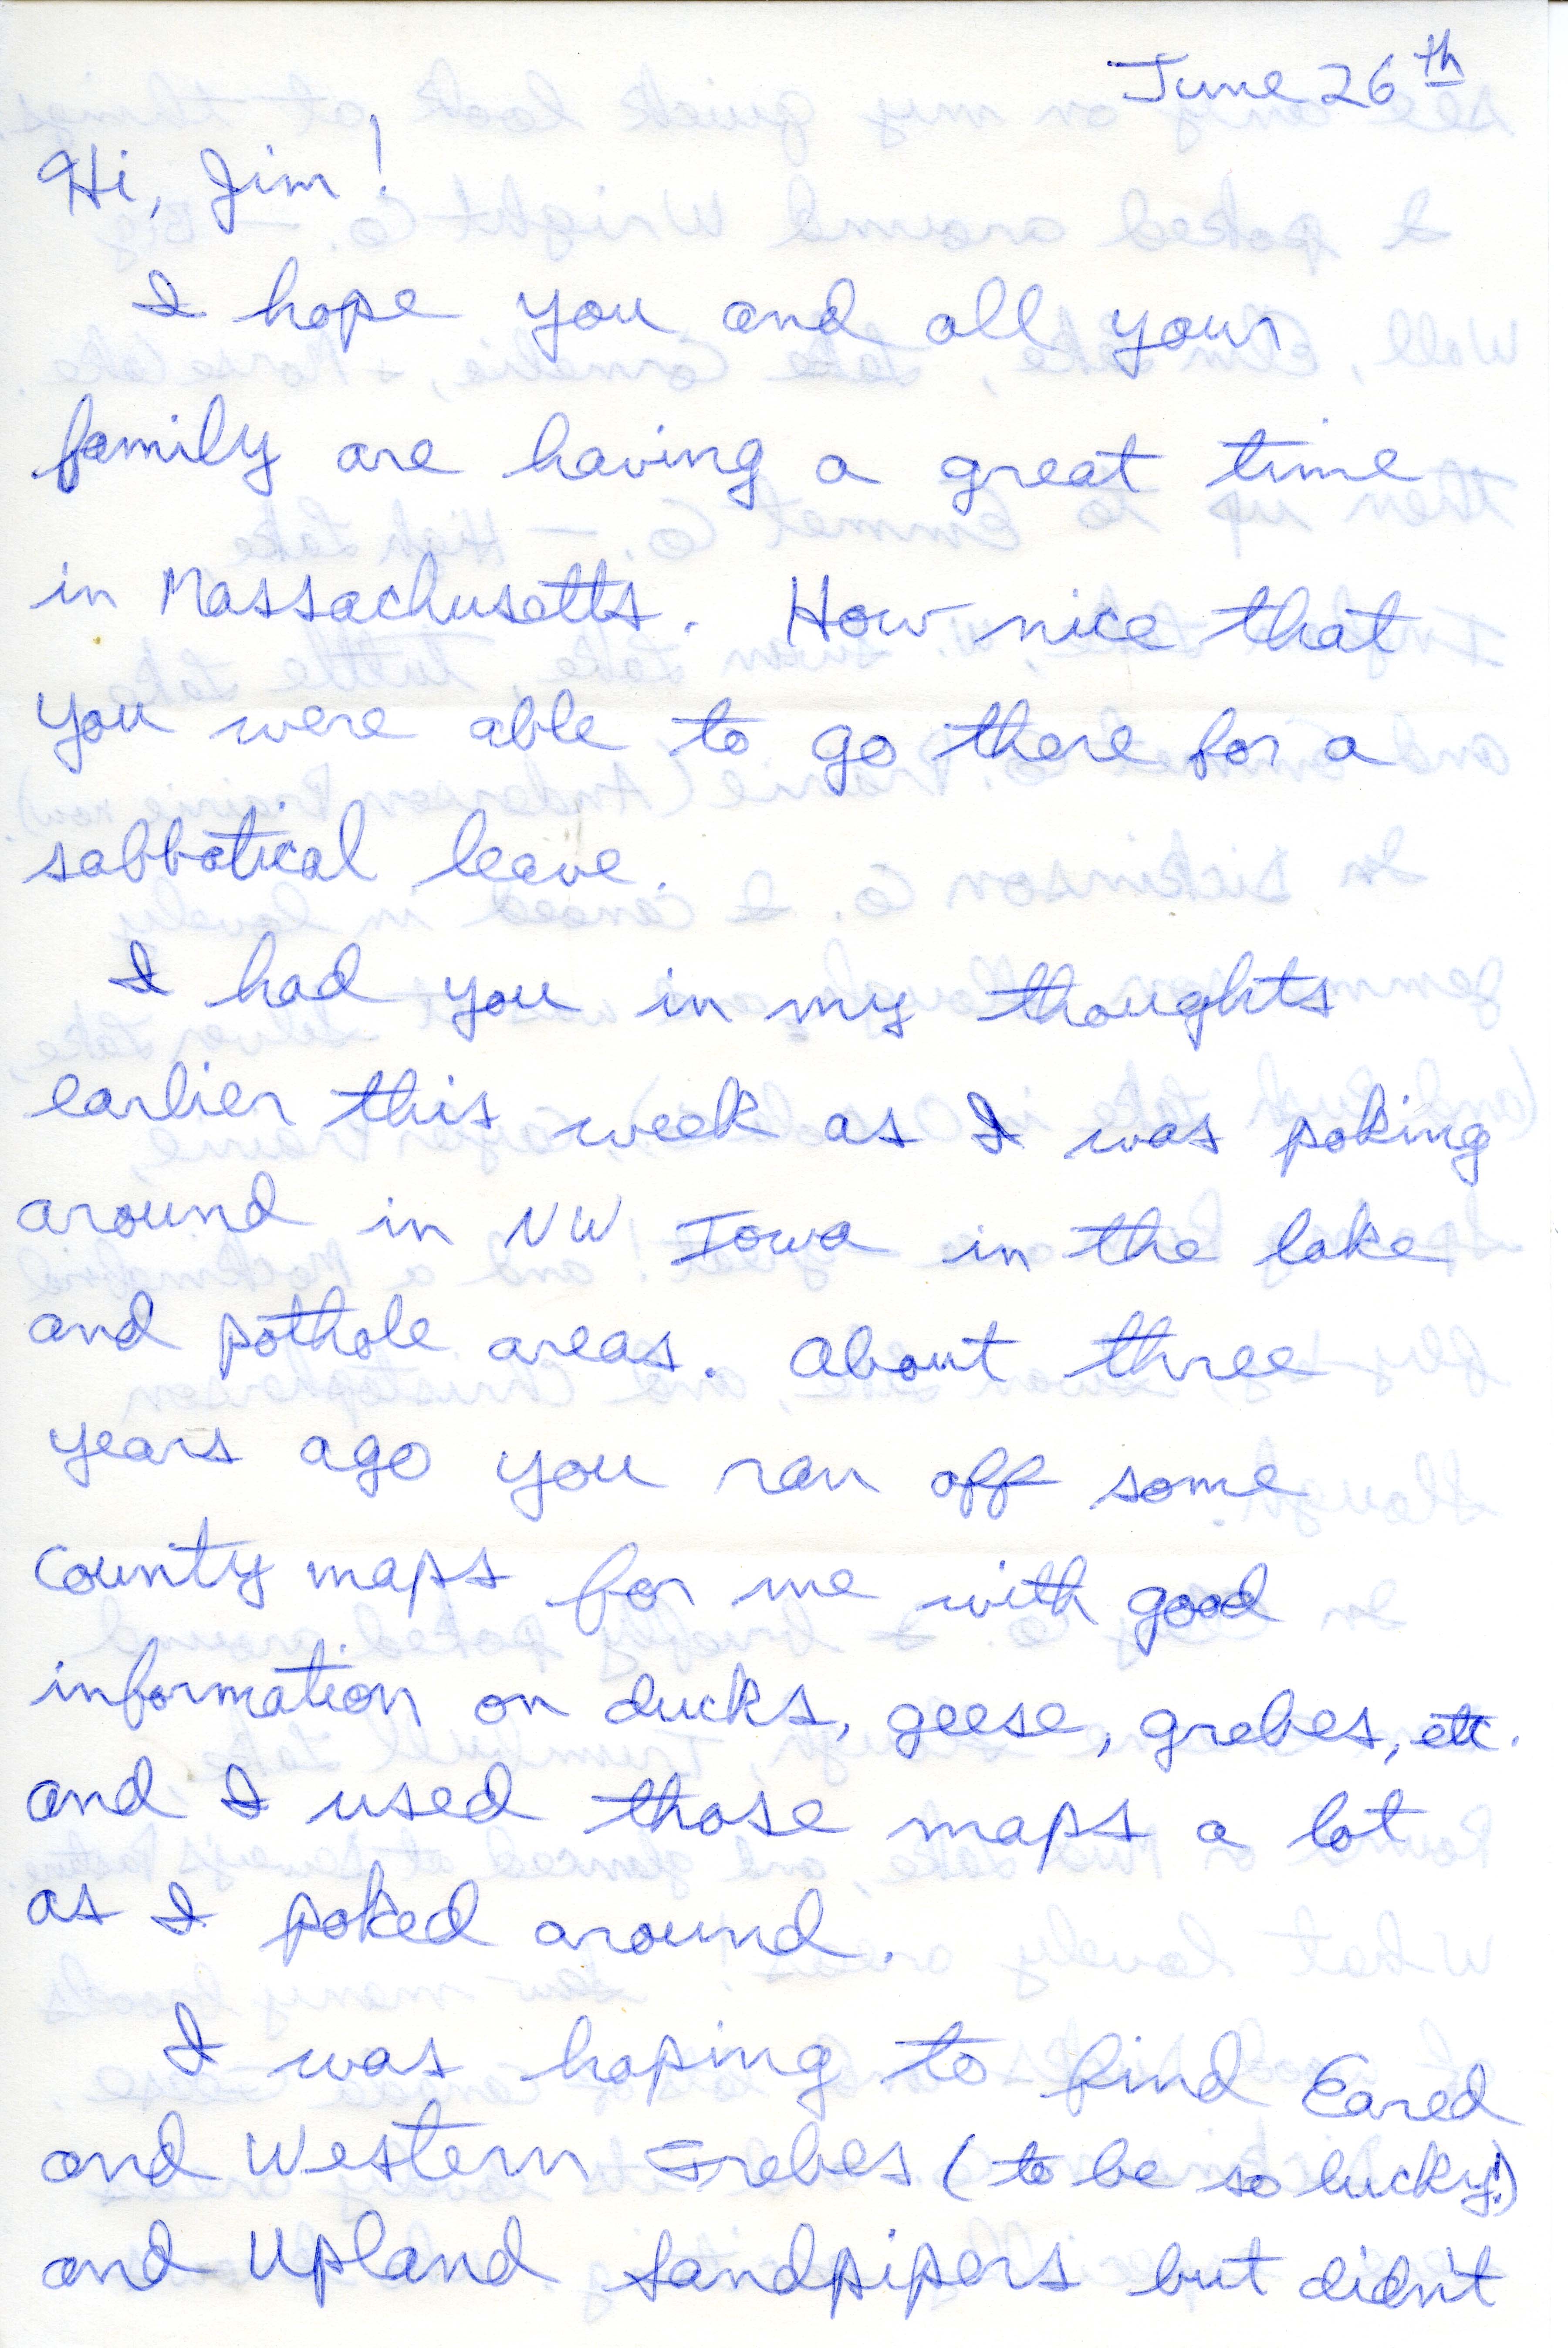 Mark Proescholdt letter to James J. Dinsmore regarding a trip to northwest Iowa and bird sightings, June 26, 1987